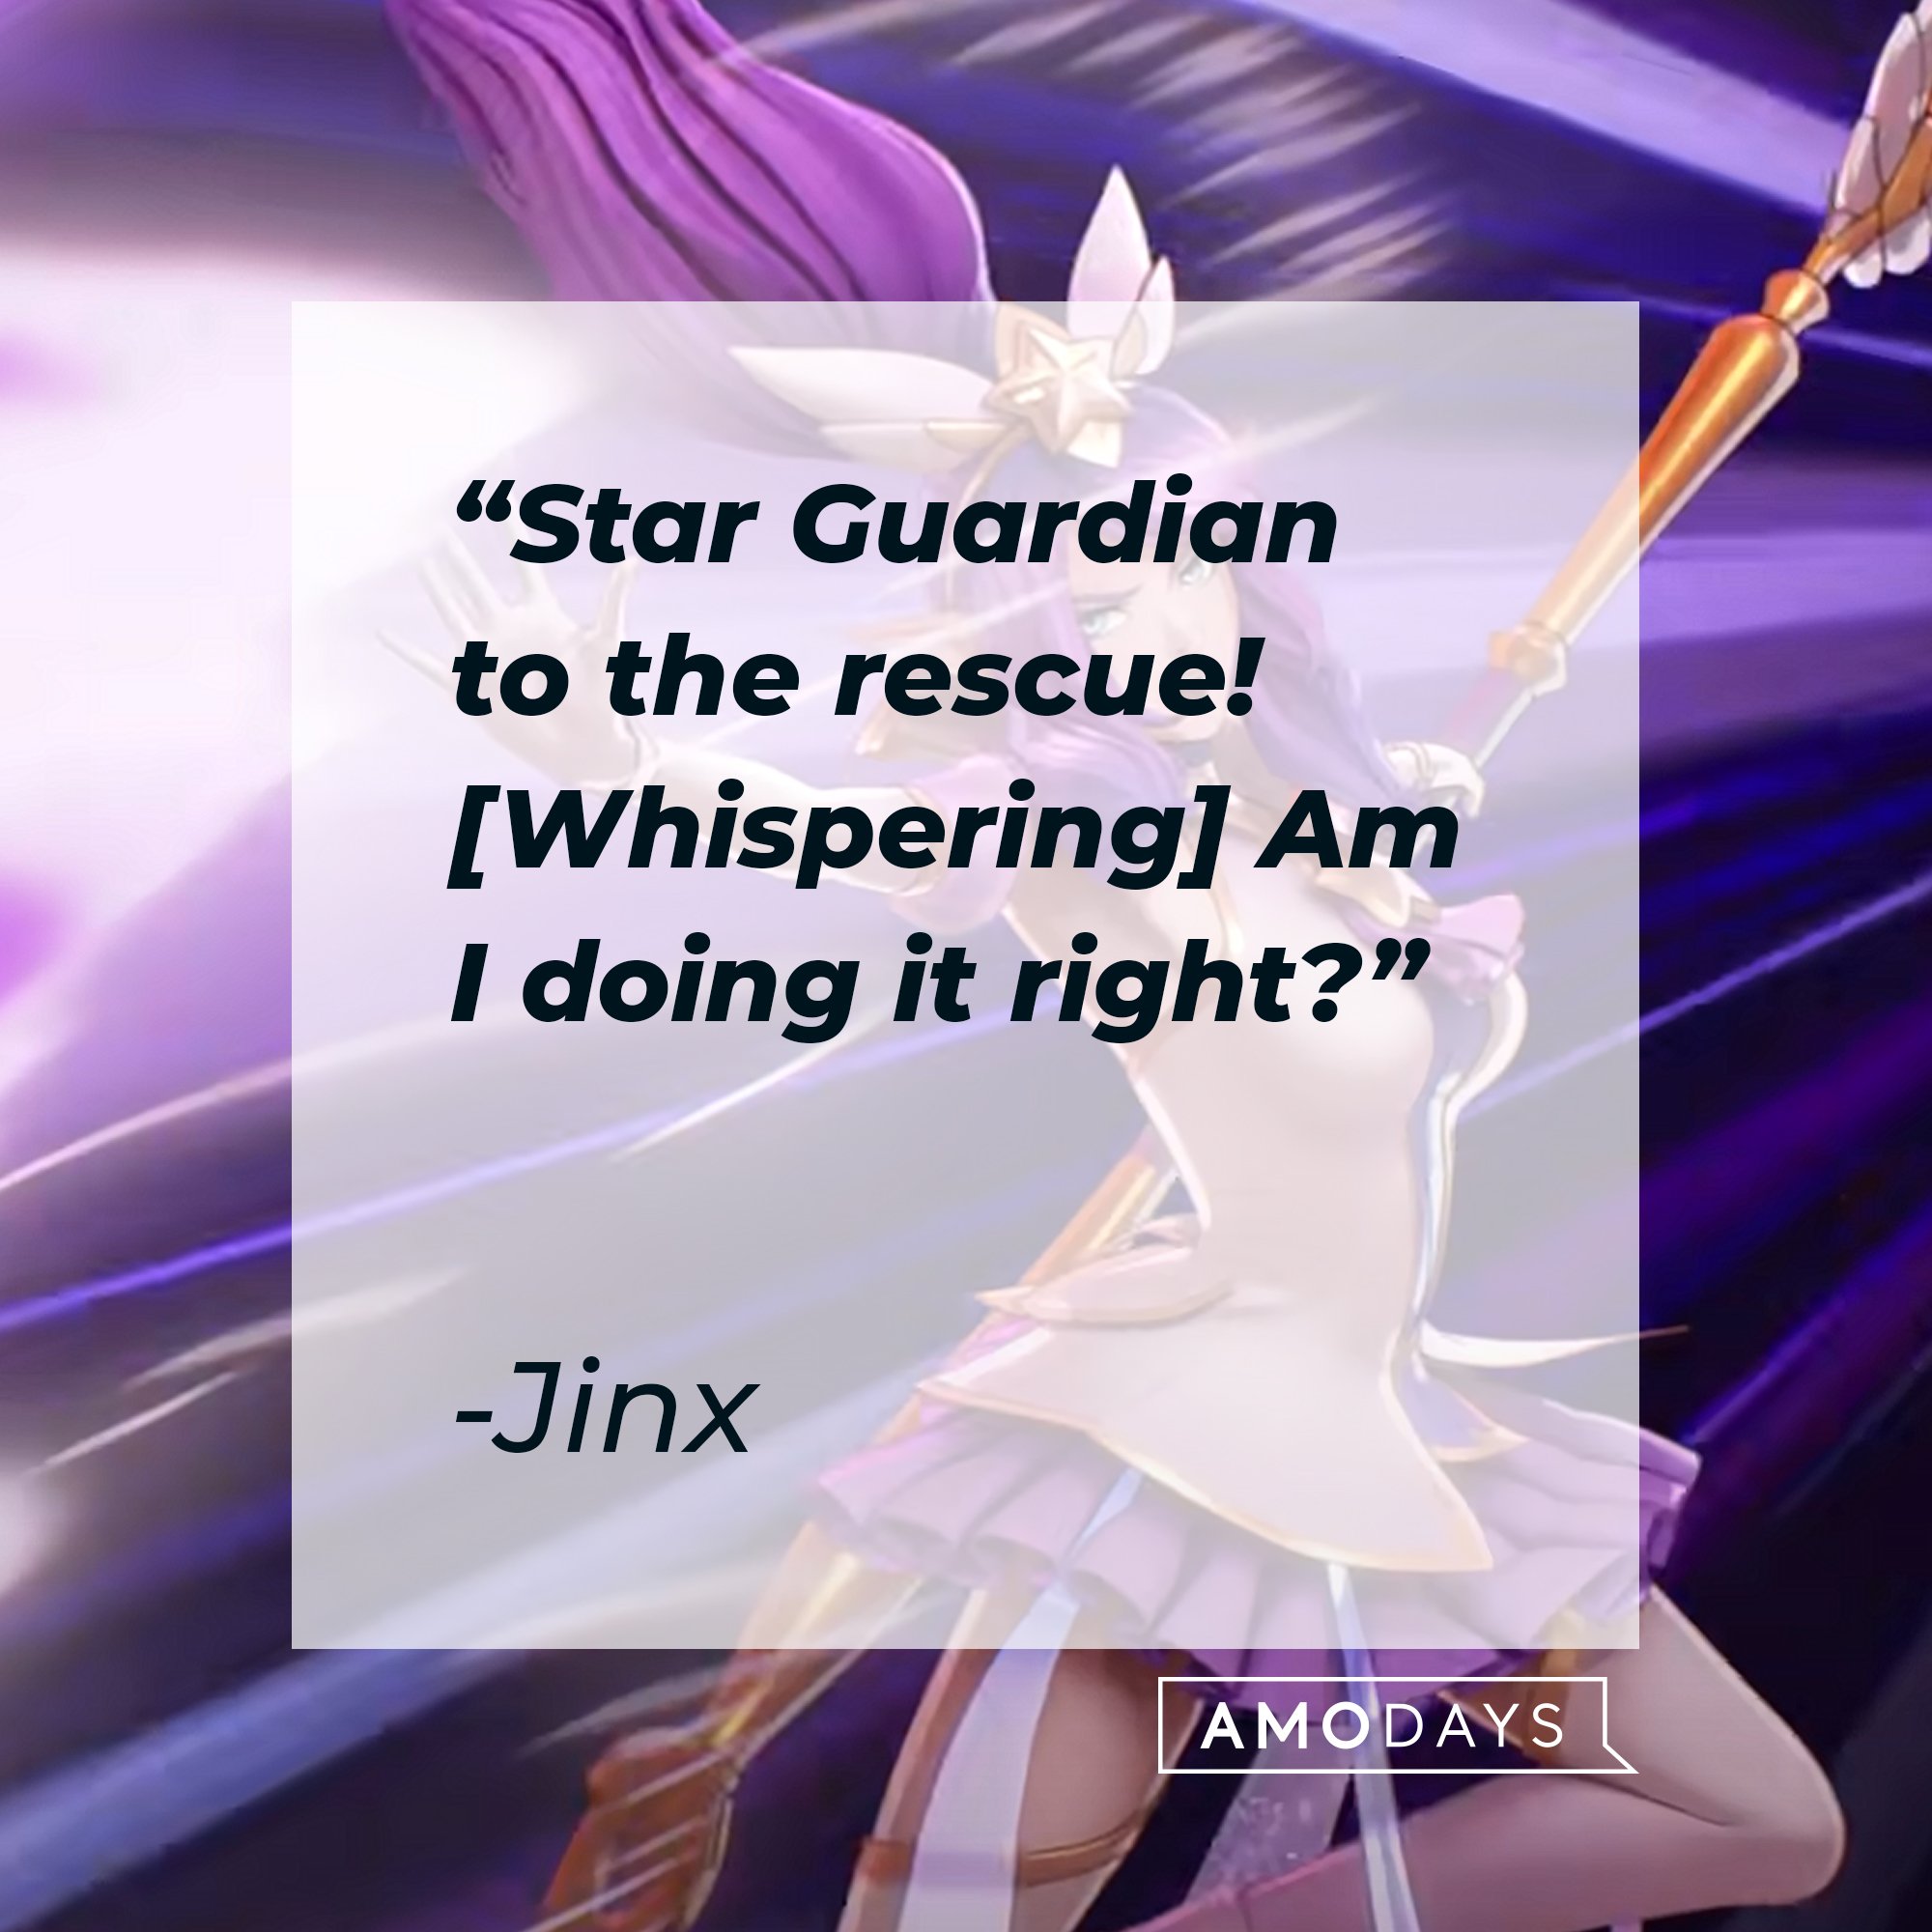 Jinx's quote: "Star Guardian to the rescue! [Whispering] Am I doing it right?" | Image: AmoDays